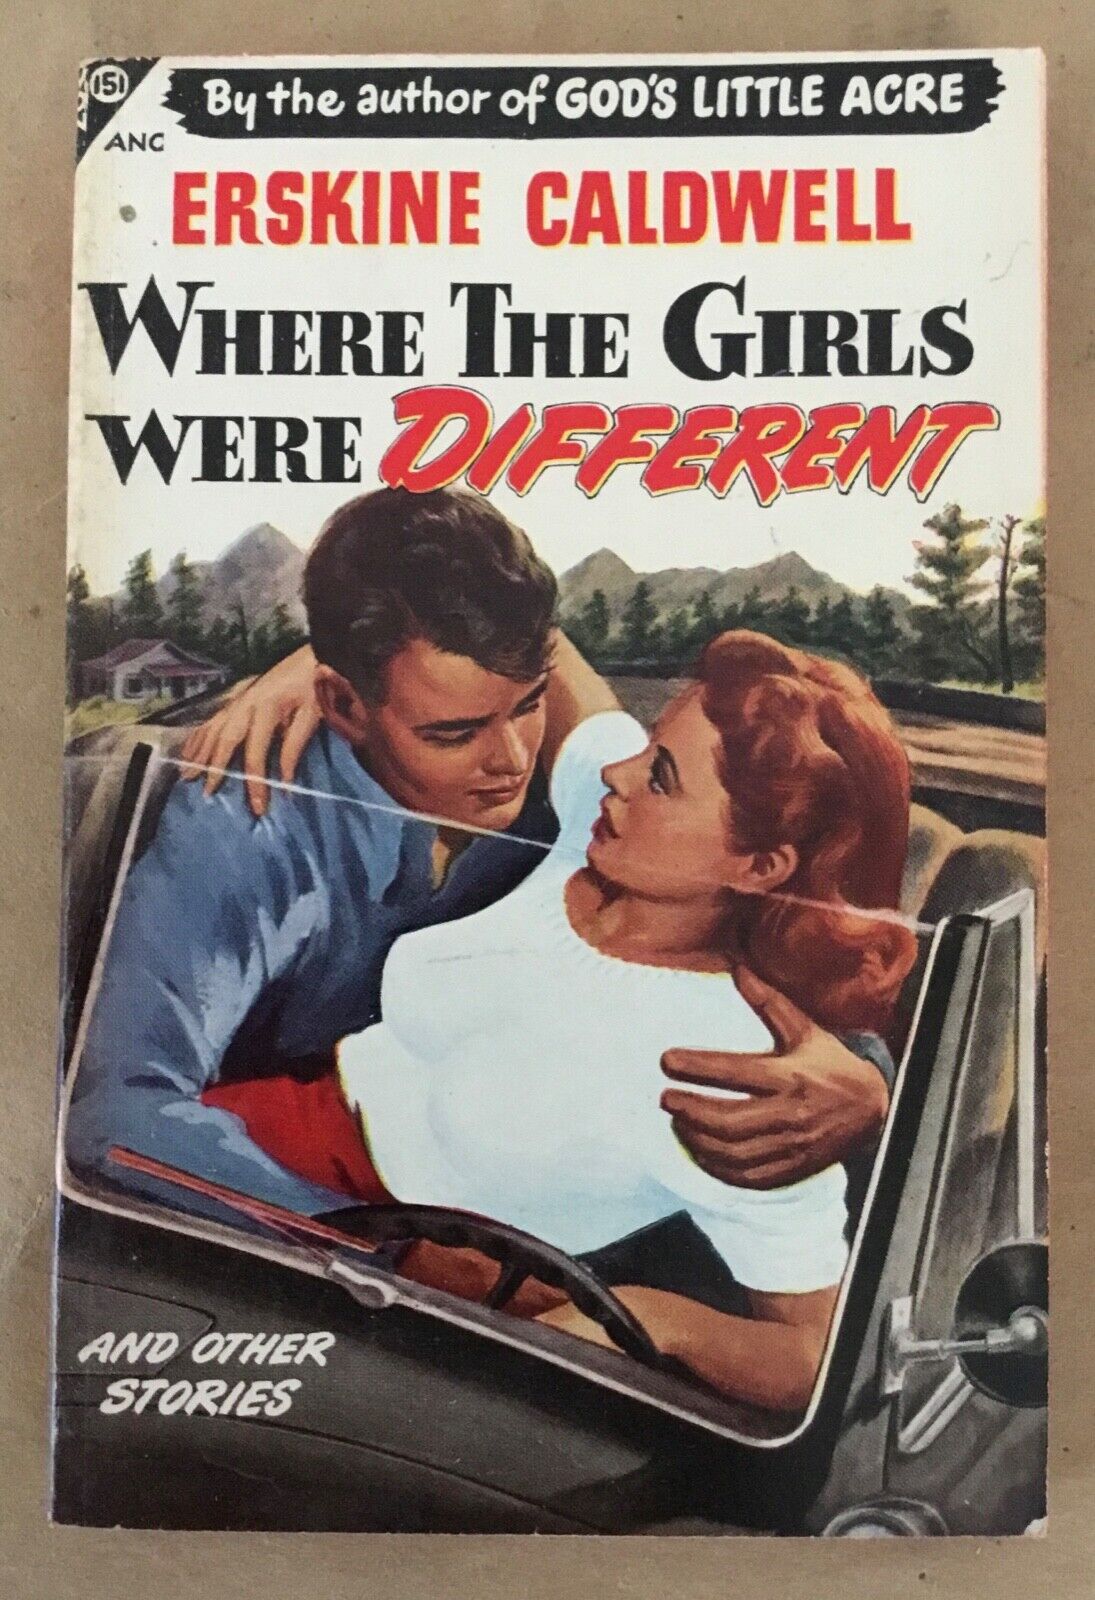 Where the Girls Were Different Erskine Caldwell vintage paperback pulp fiction 